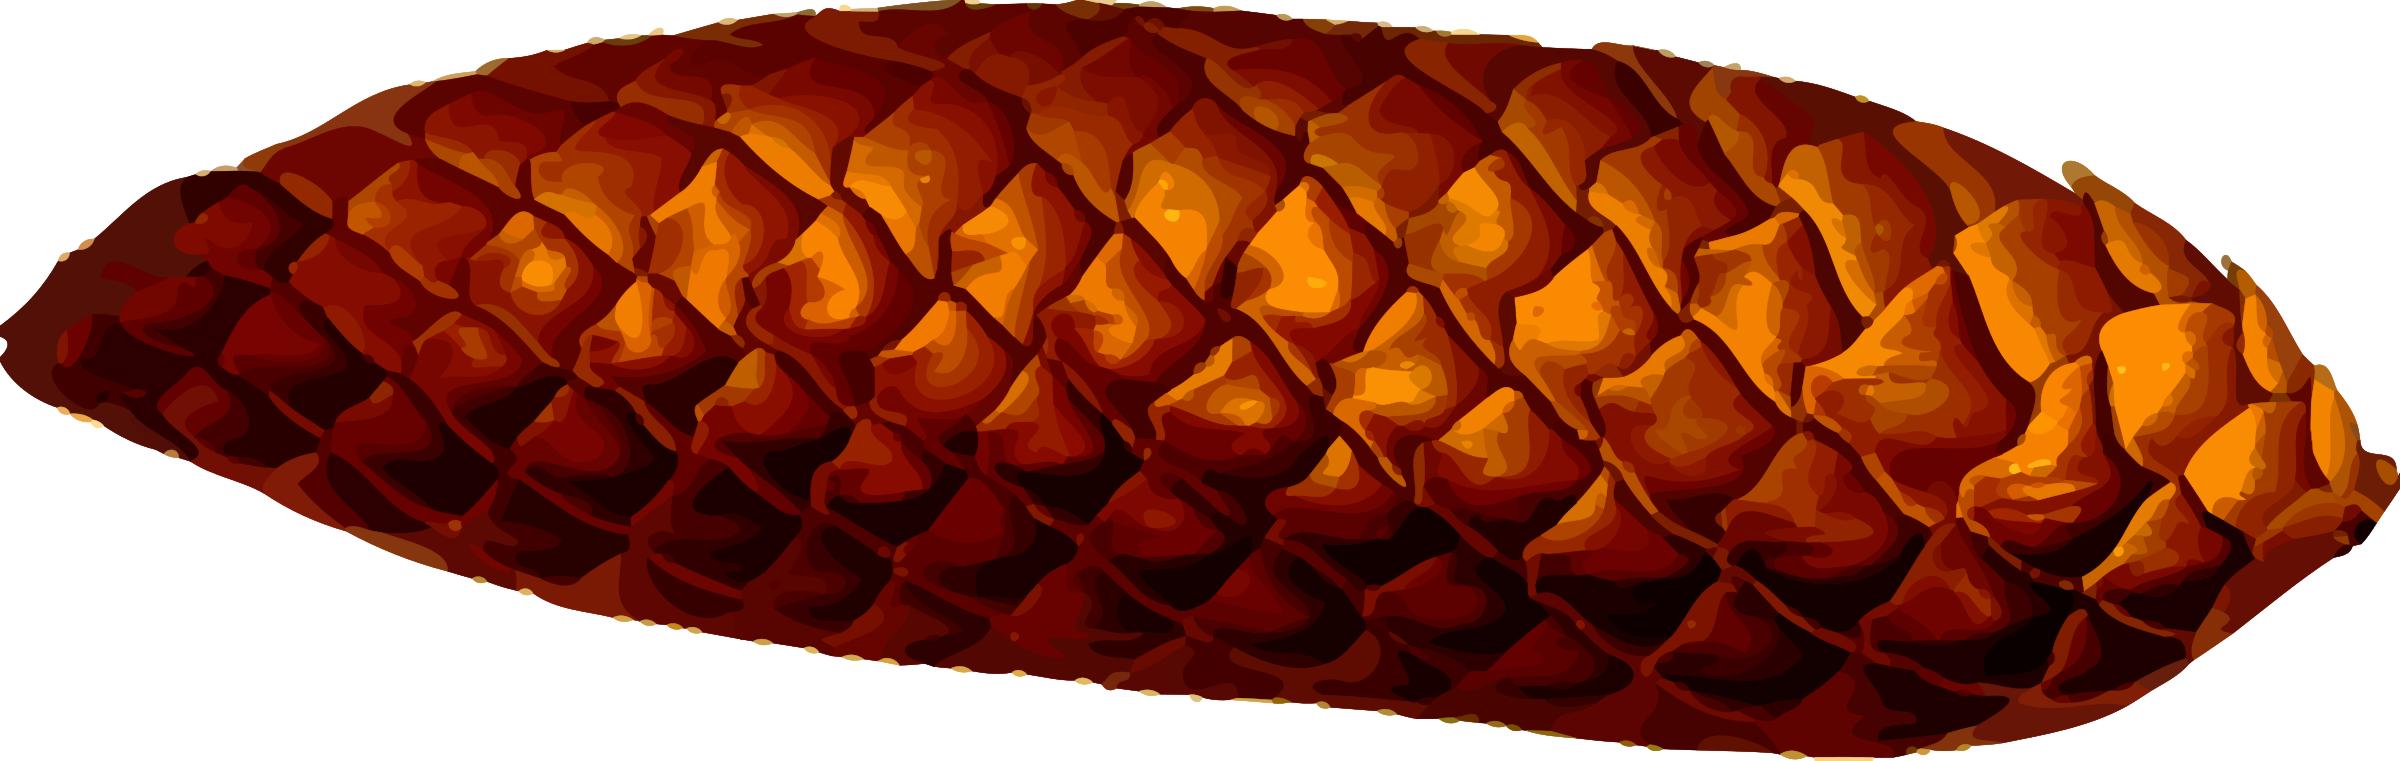 Pine cone (detailed) png